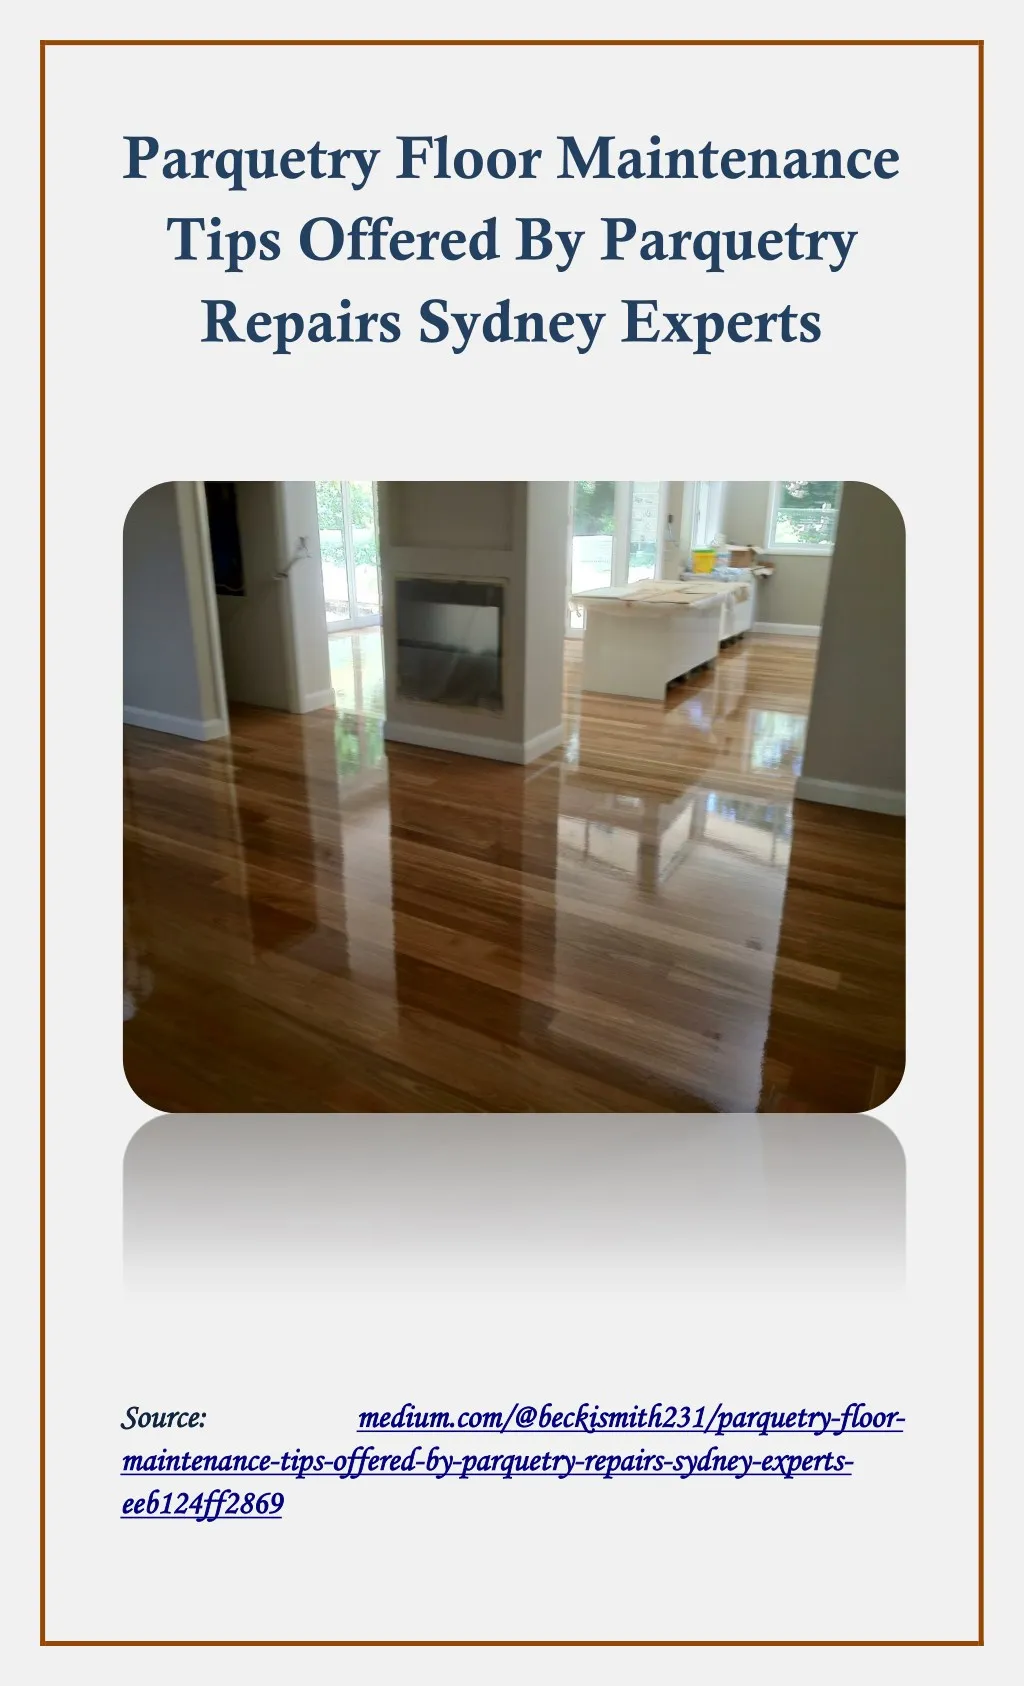 parquetry floor maintenance tips offered